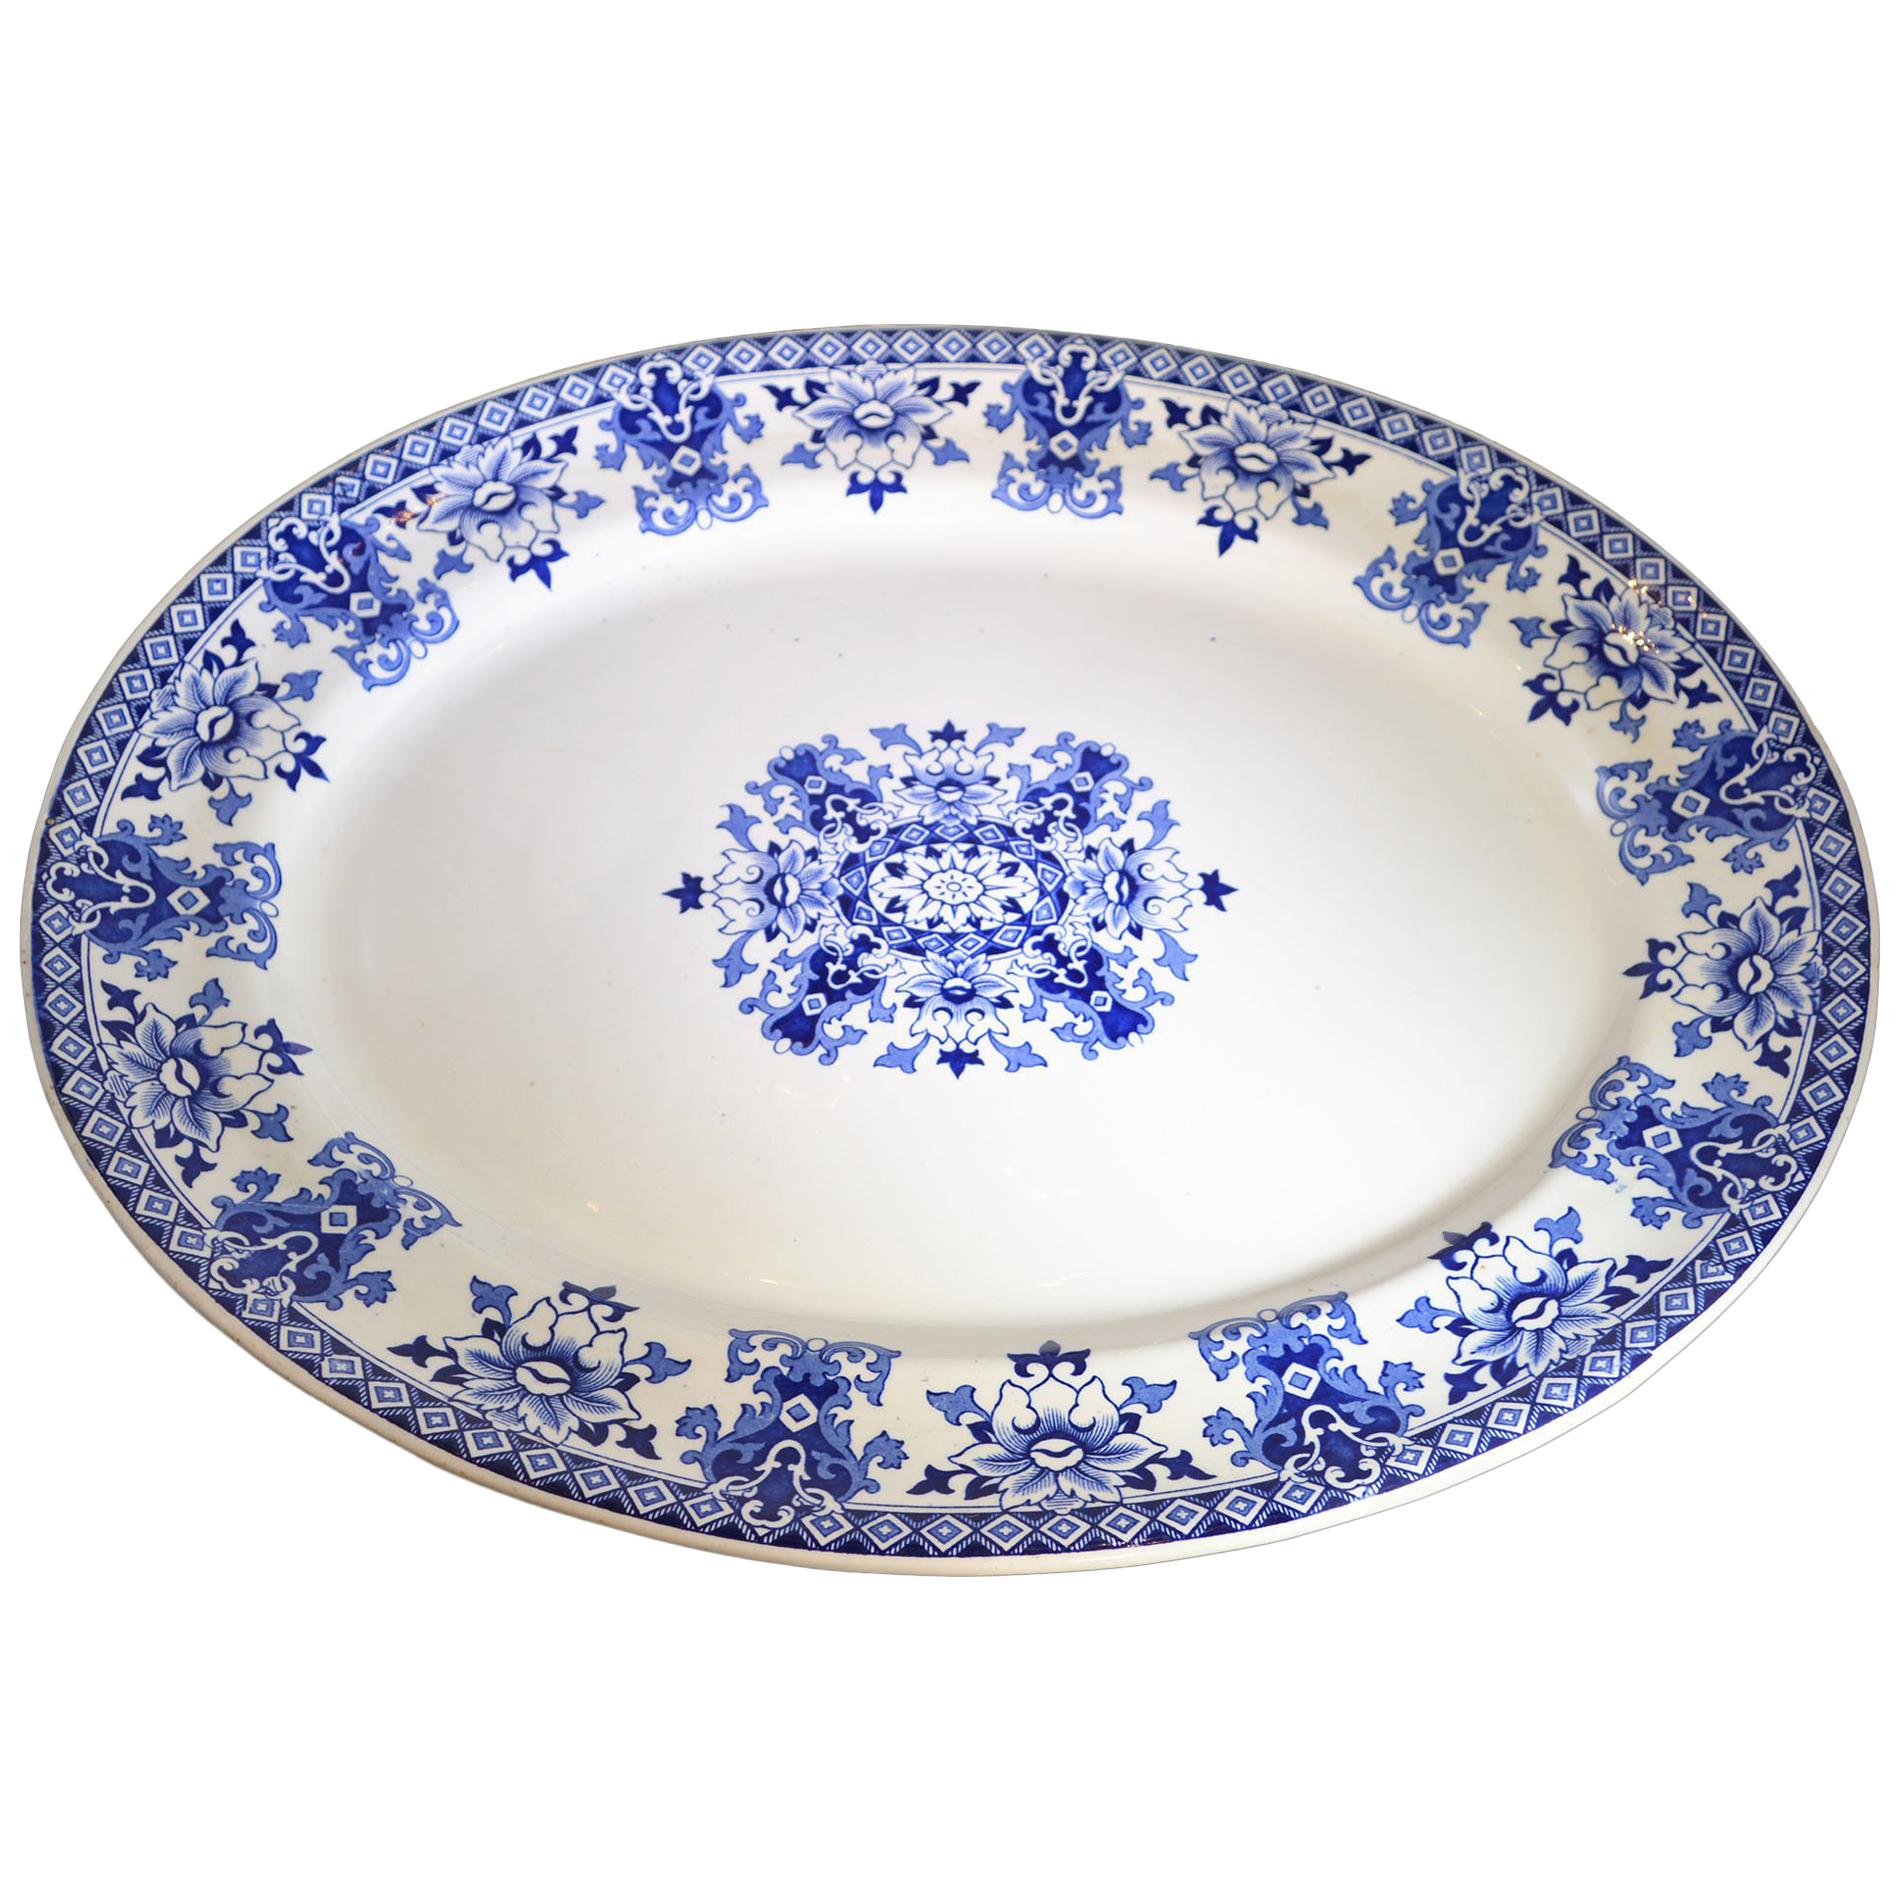 1880s Antique English Blue and White Platter For Sale